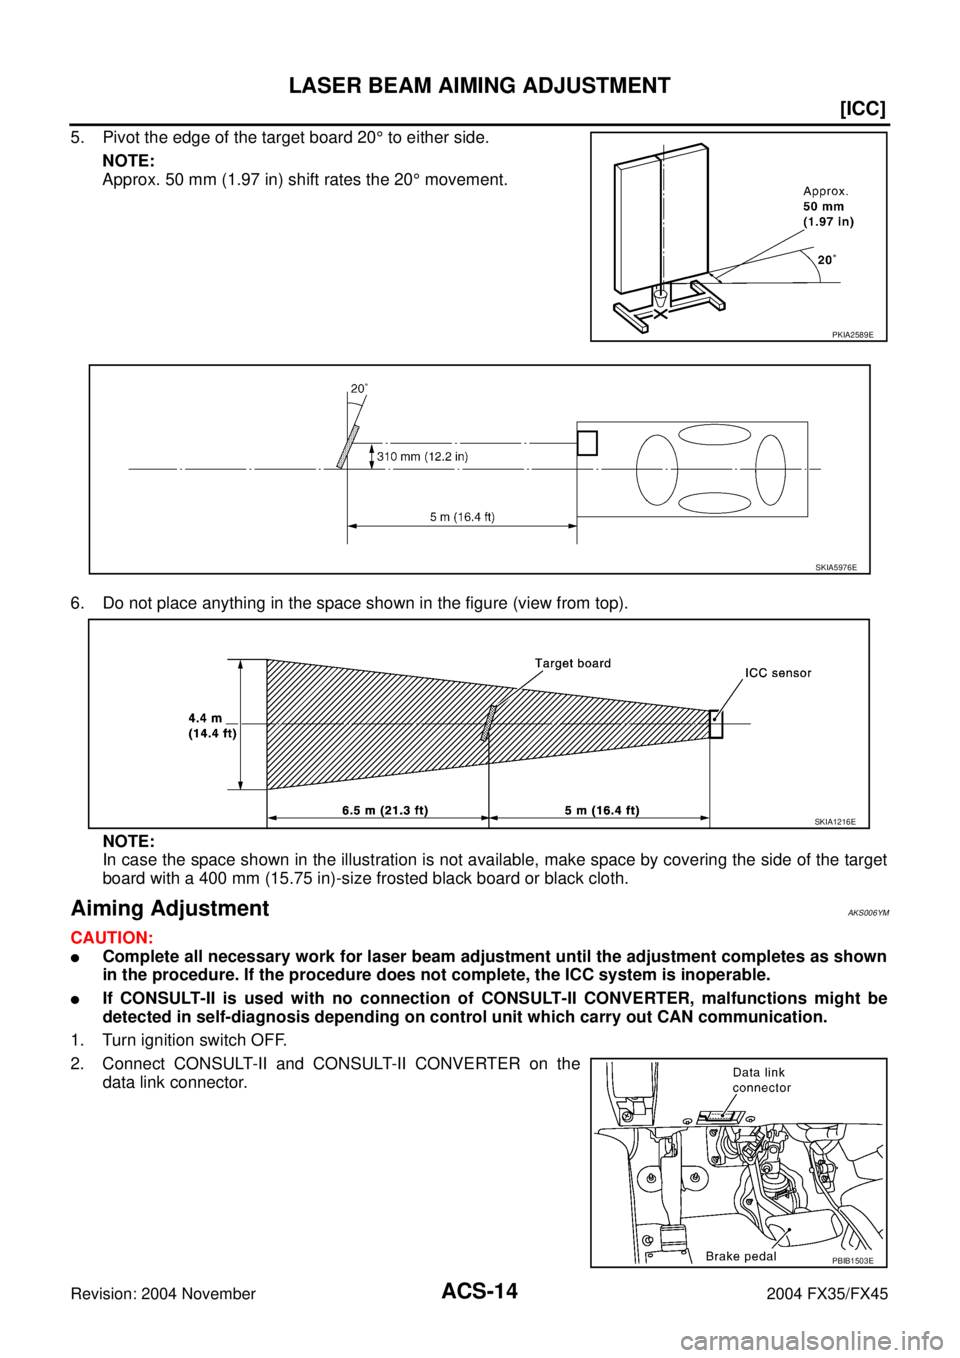 INFINITI FX35 2004 Owners Manual ACS-14
[ICC]
LASER BEAM AIMING ADJUSTMENT
Revision: 2004 November 2004 FX35/FX45
5. Pivot the edge of the target board 20° to either side.
NOTE:
Approx. 50 mm (1.97 in) shift rates the 20° movement.